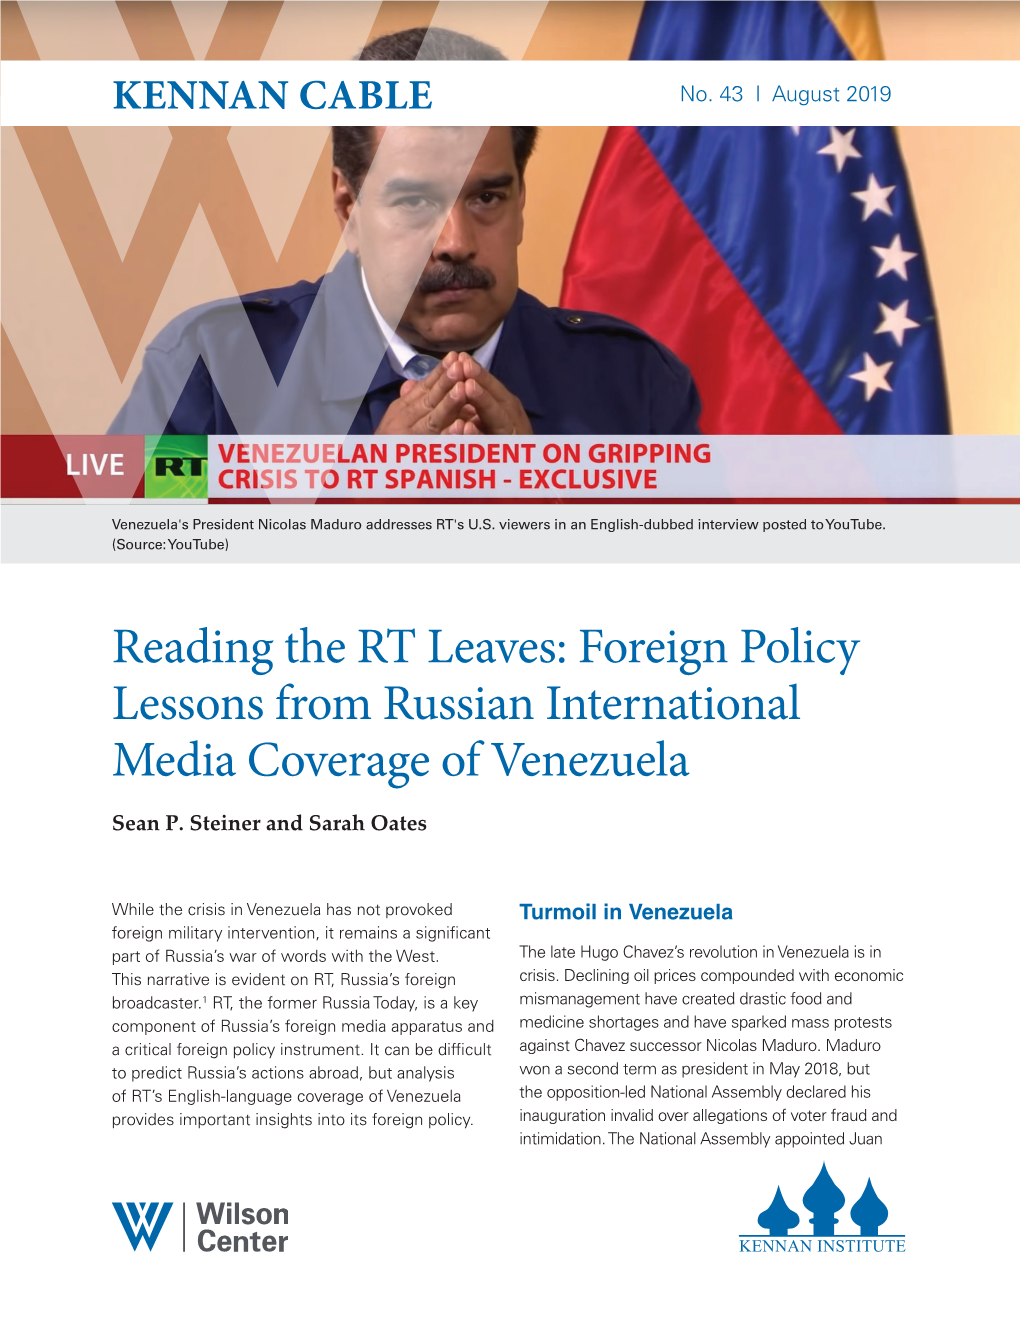 Foreign Policy Lessons from Russian International Media Coverage of Venezuela Sean P